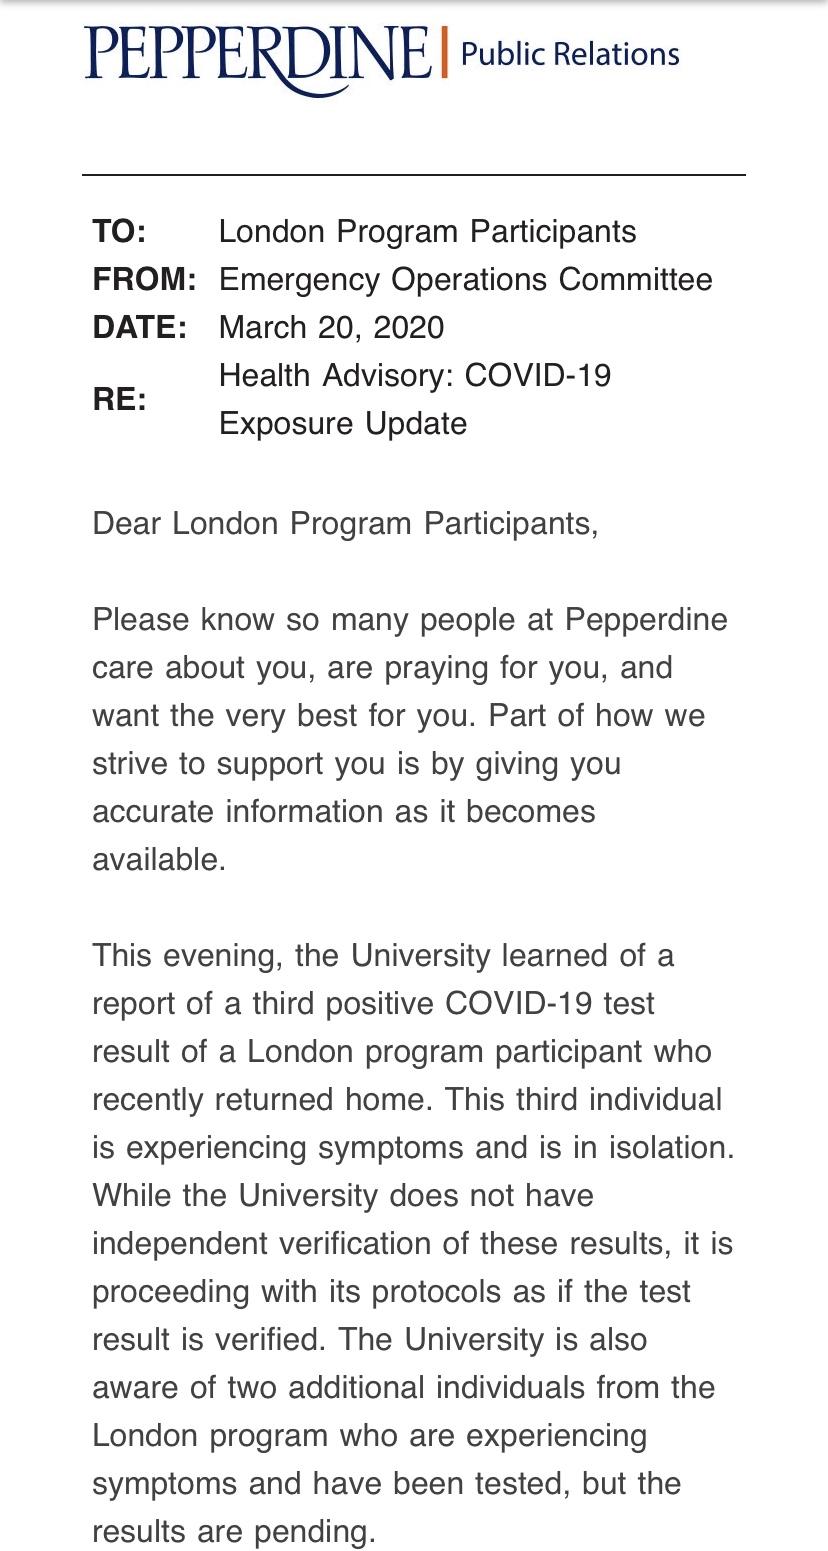 Pepperdine sent this email to London program participants March 20 with news that a third student in the program tested positive for COVID-19.